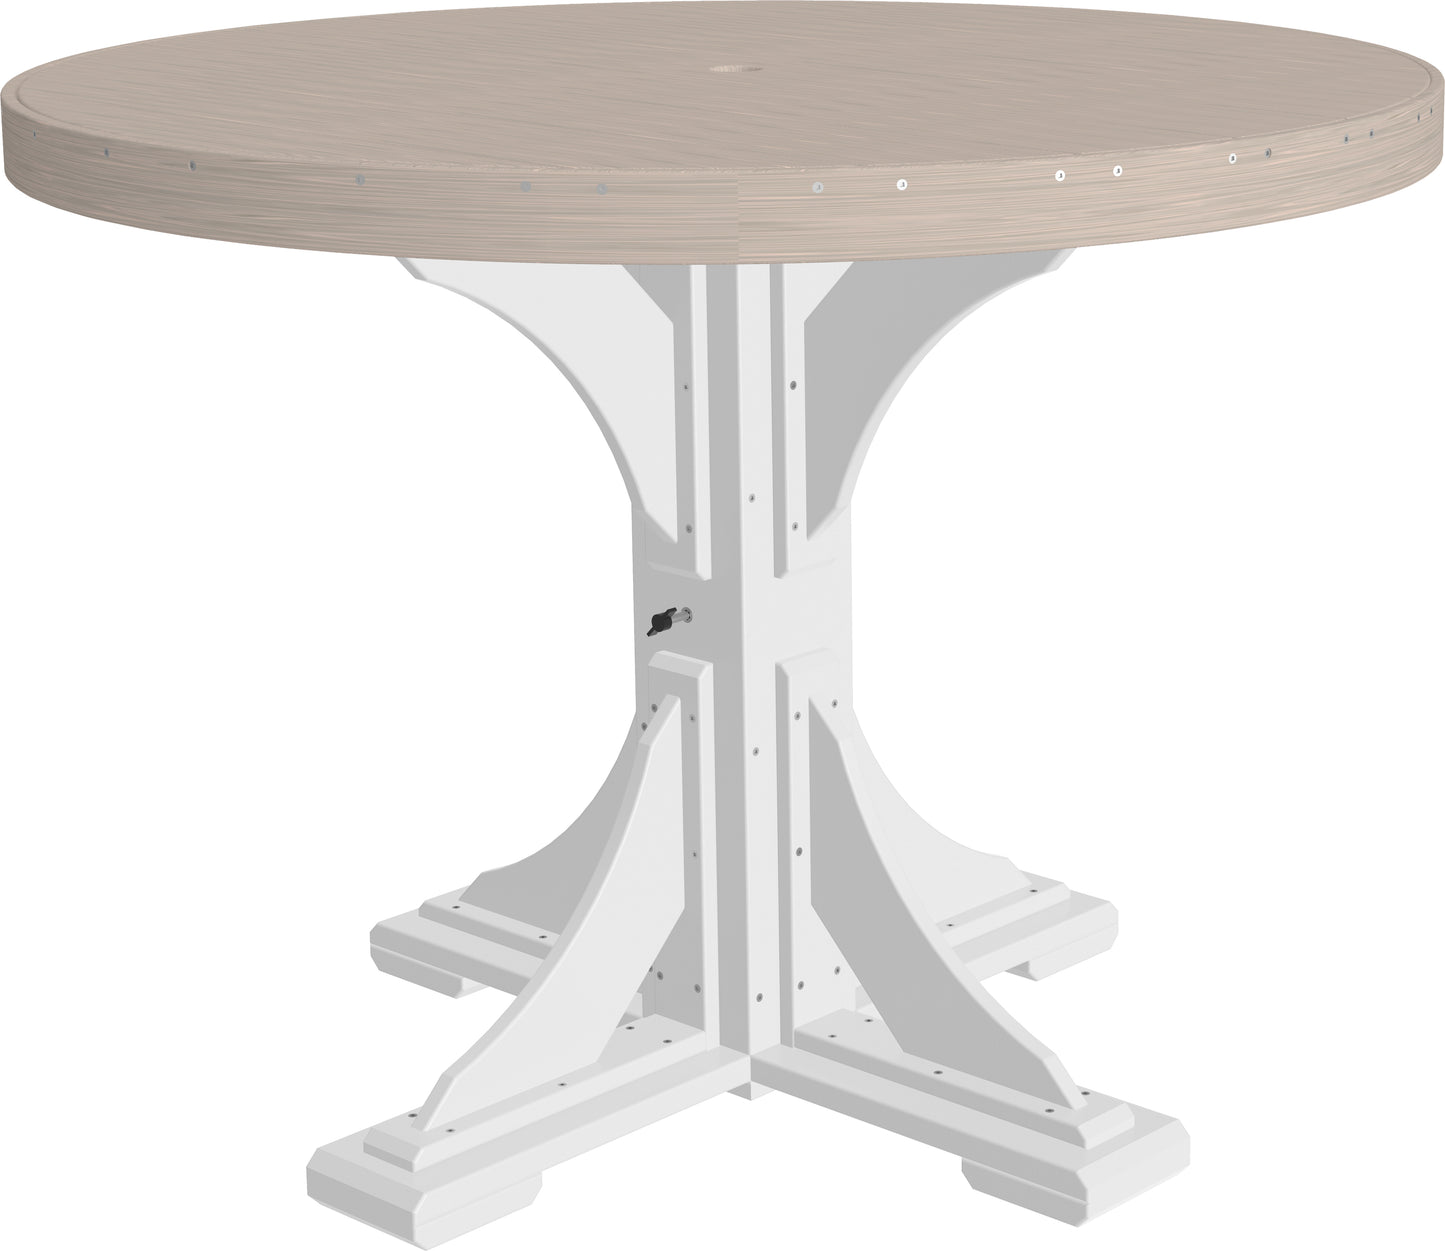 LuxCraft Recycled Plastic 4' Round Table (COUNTER HEIGHT) - LEAD TIME TO SHIP 3 TO 4 WEEKS